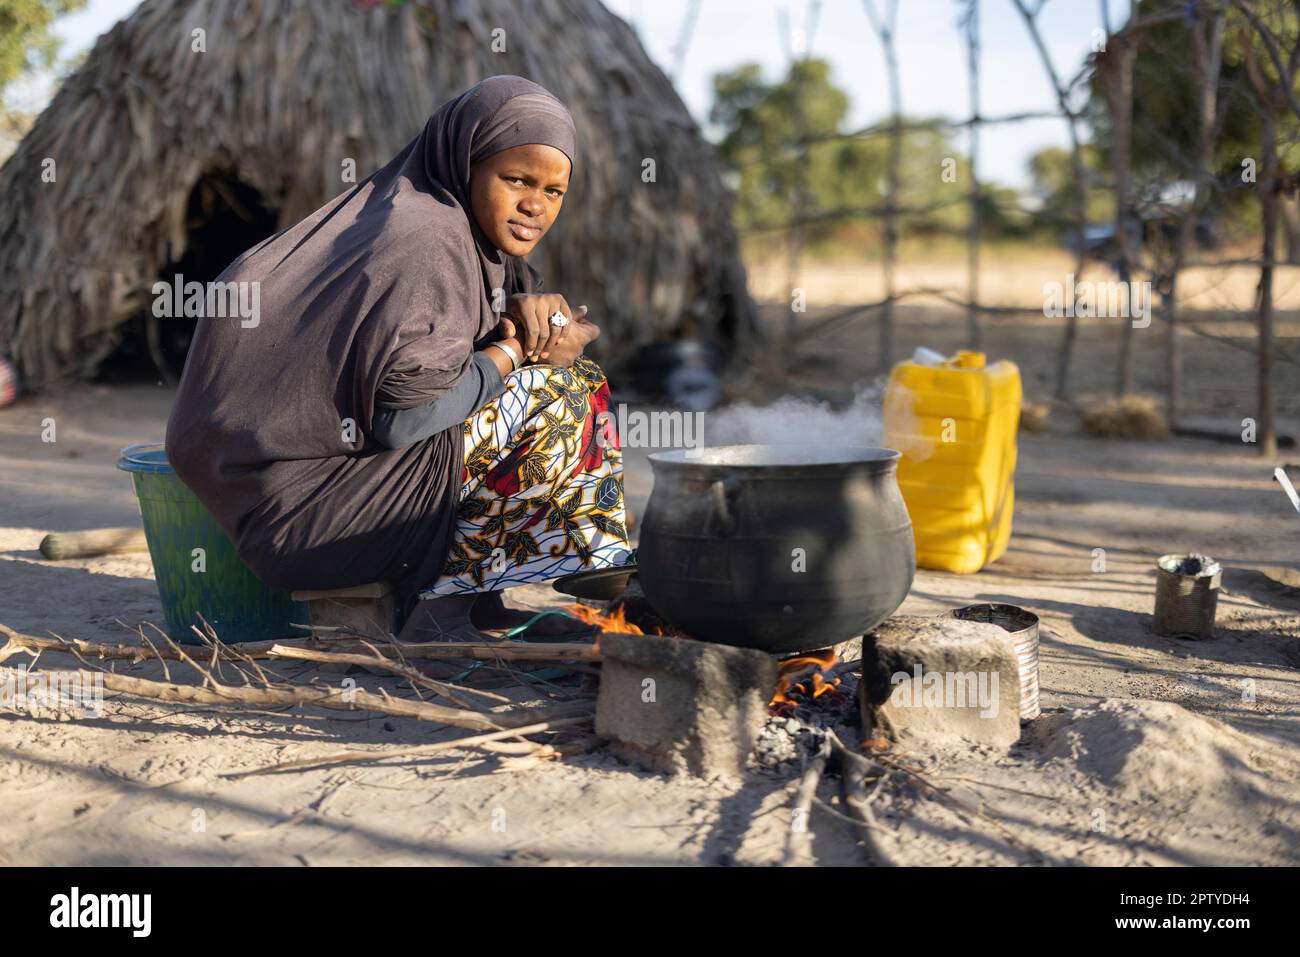 A young Fulani refugee woman, displaced from conflict in the North, boils food over an open fire in Segou Region, Mali, West Africa. 2022 Mali drought and hunger crisis. Stock Photo